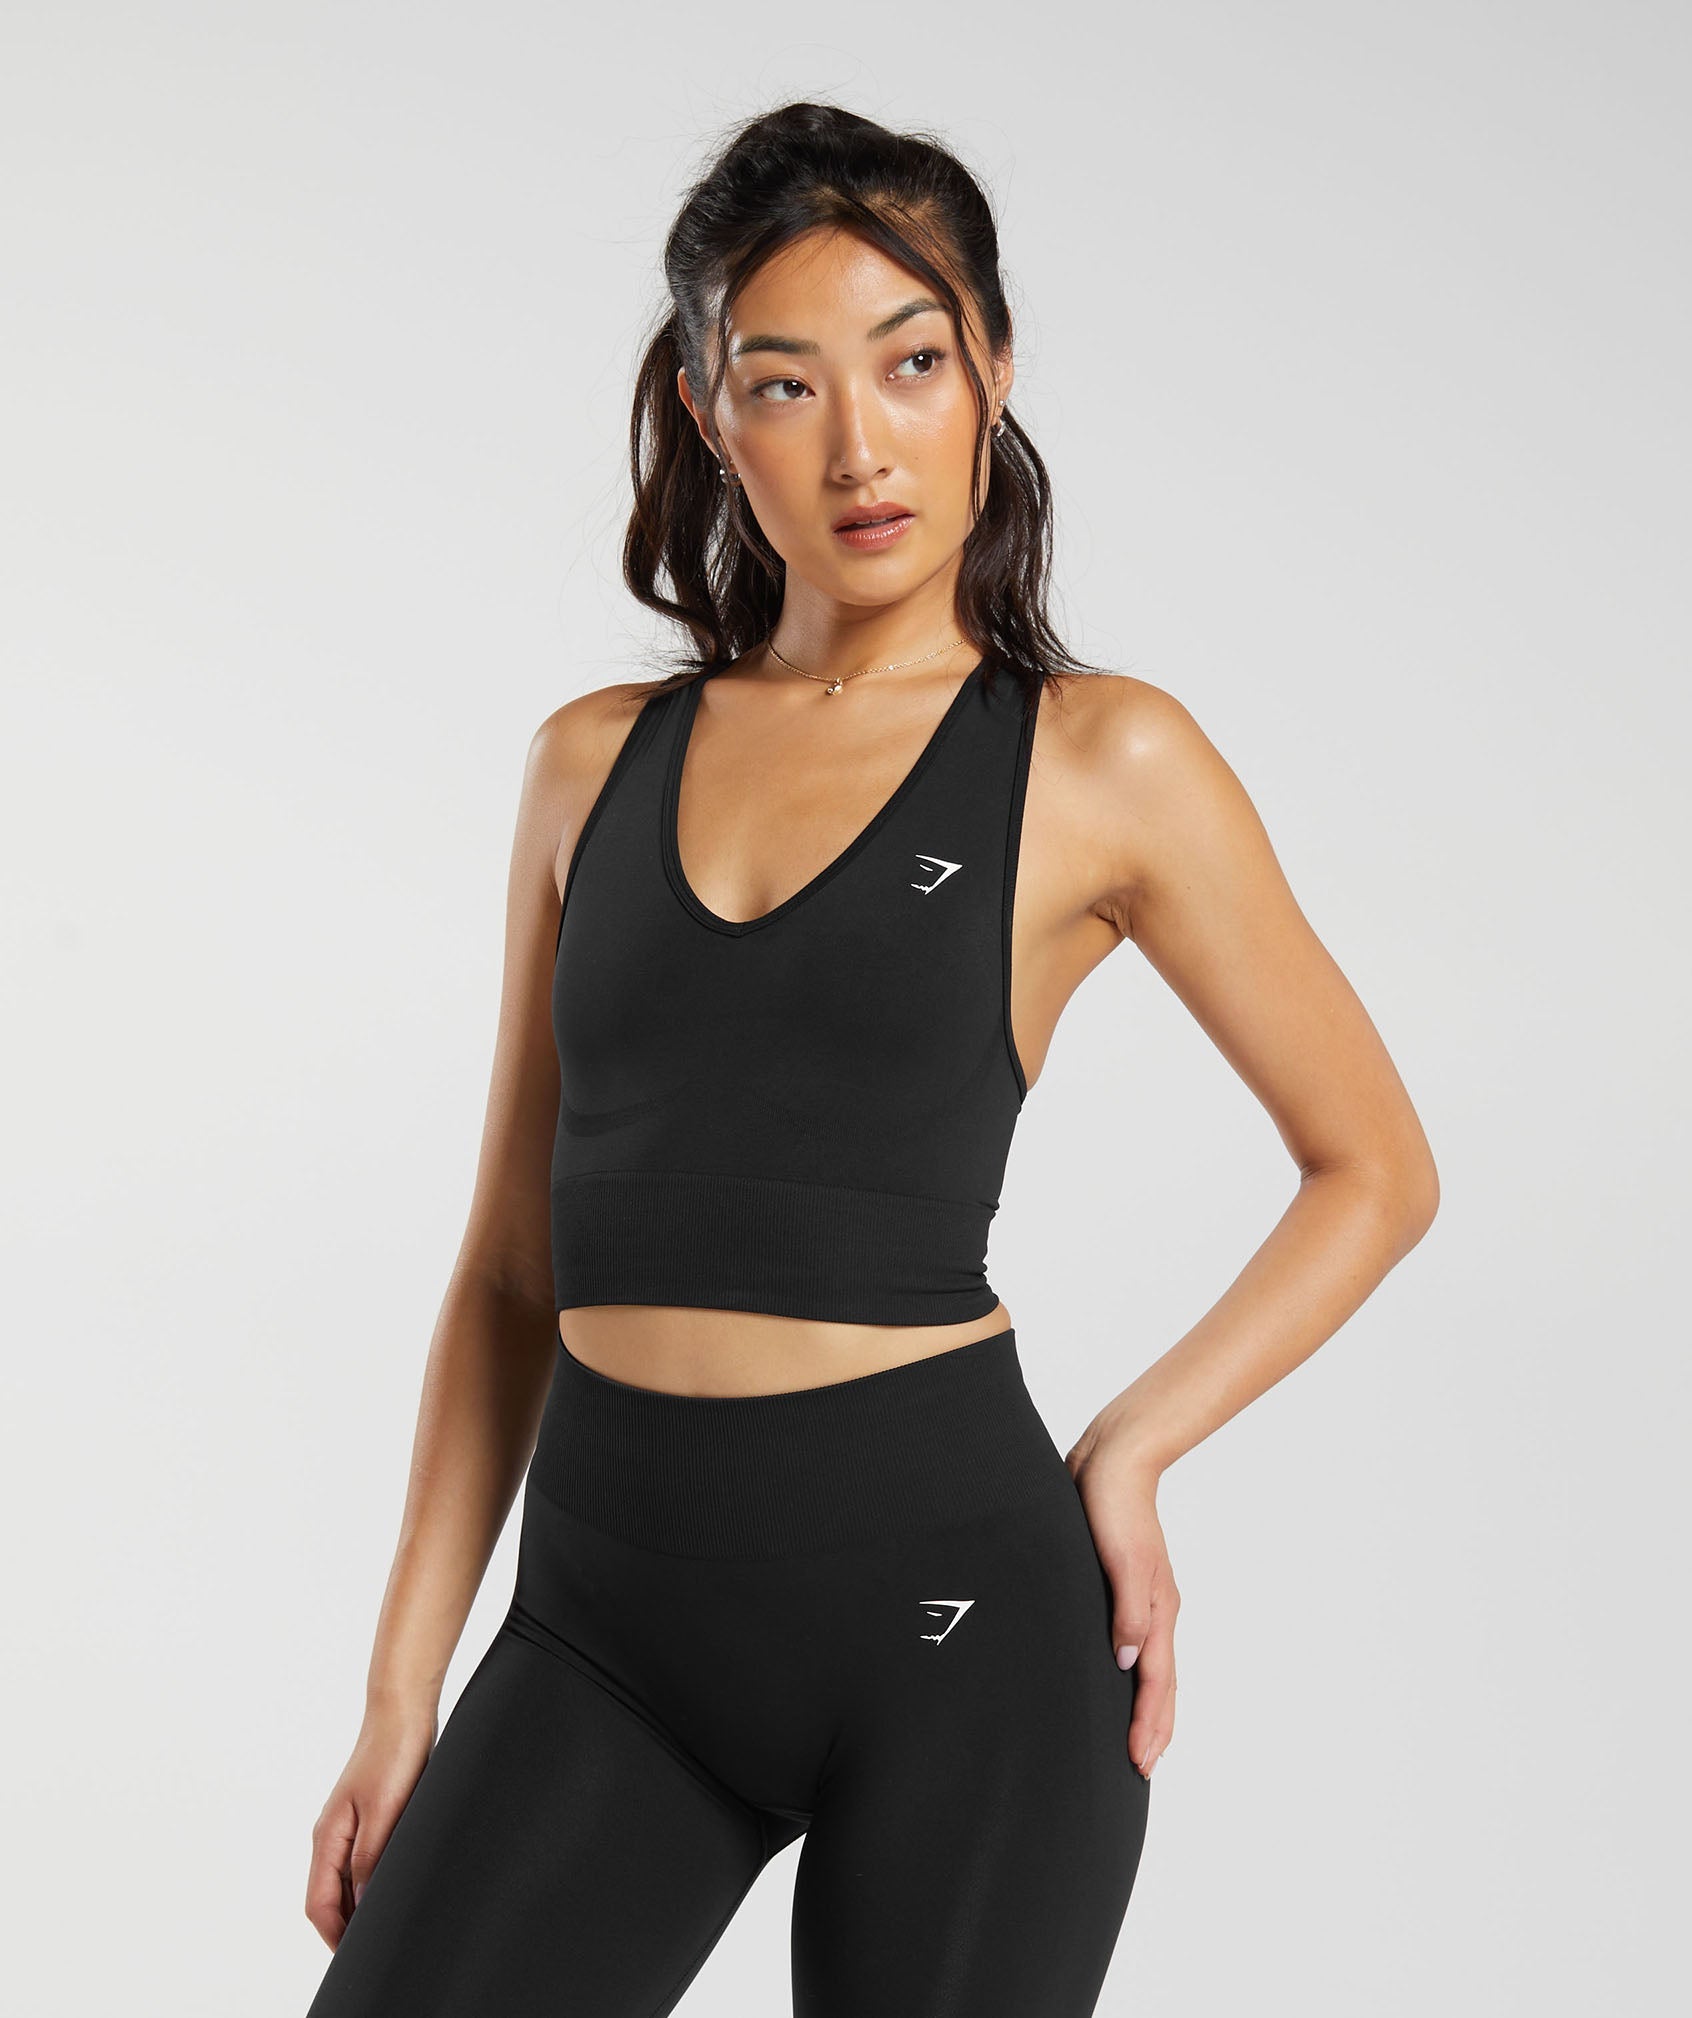 Gymshark  Womens workout outfits, Sporty outfits, Clothes for women